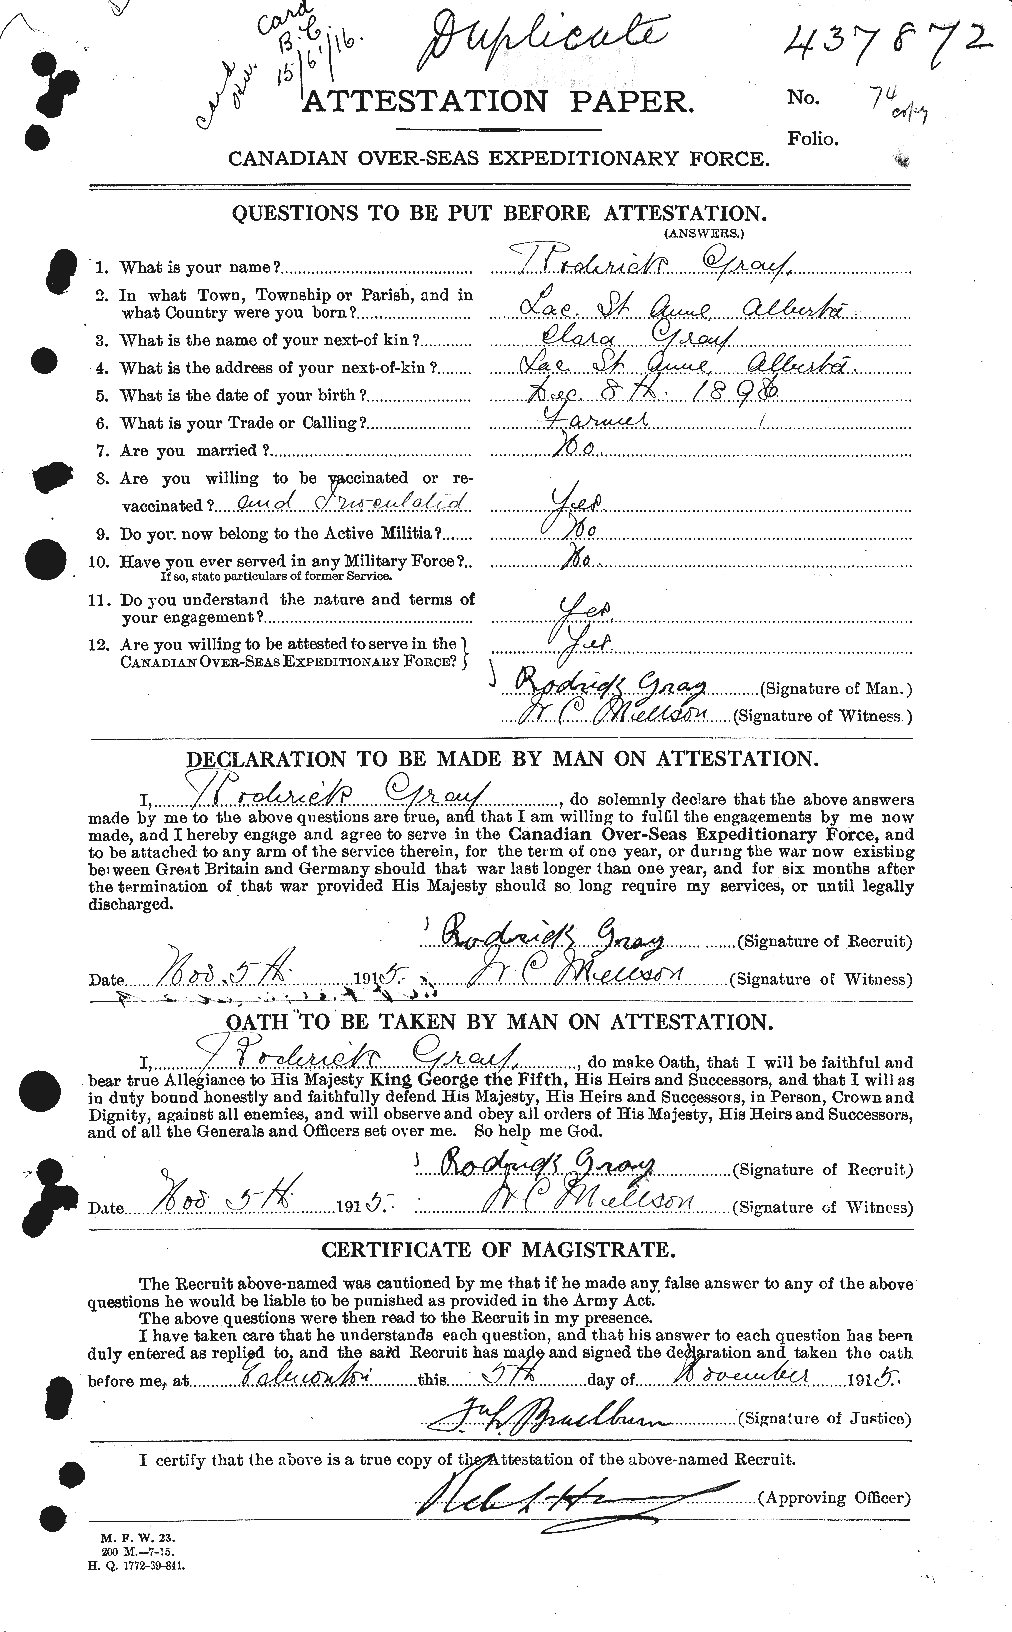 Personnel Records of the First World War - CEF 360732a